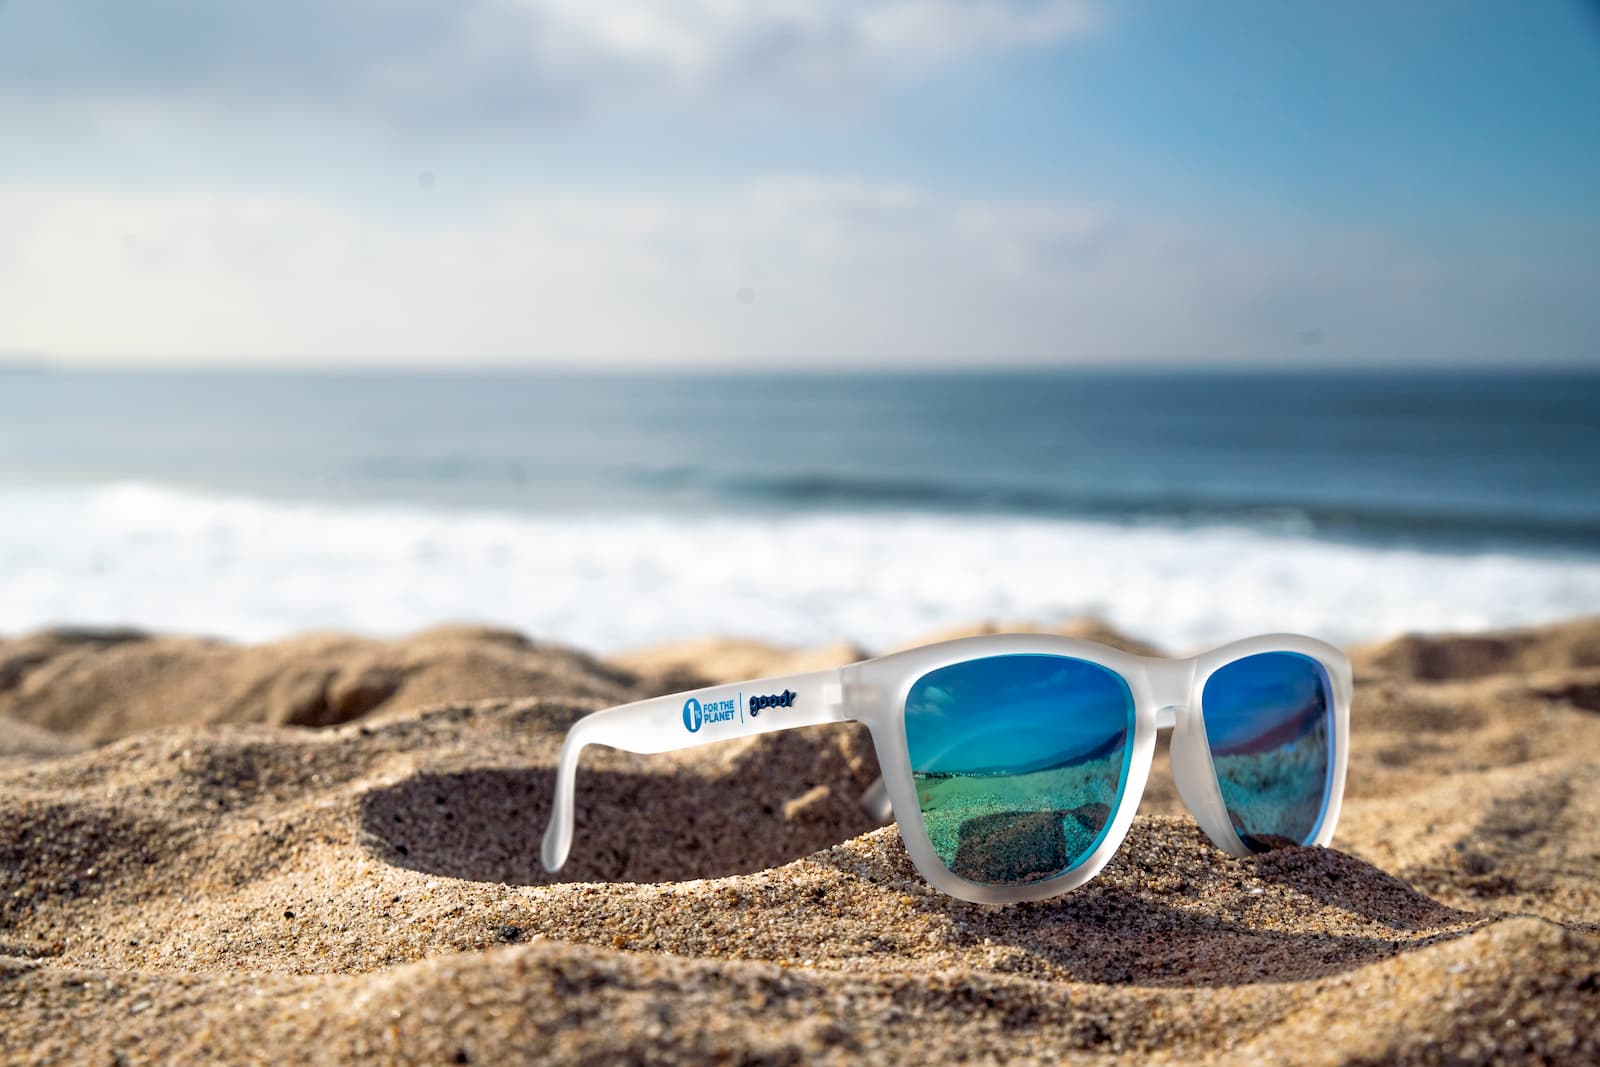 goodr Releases 1% for the Planet Recycled Sunglasses